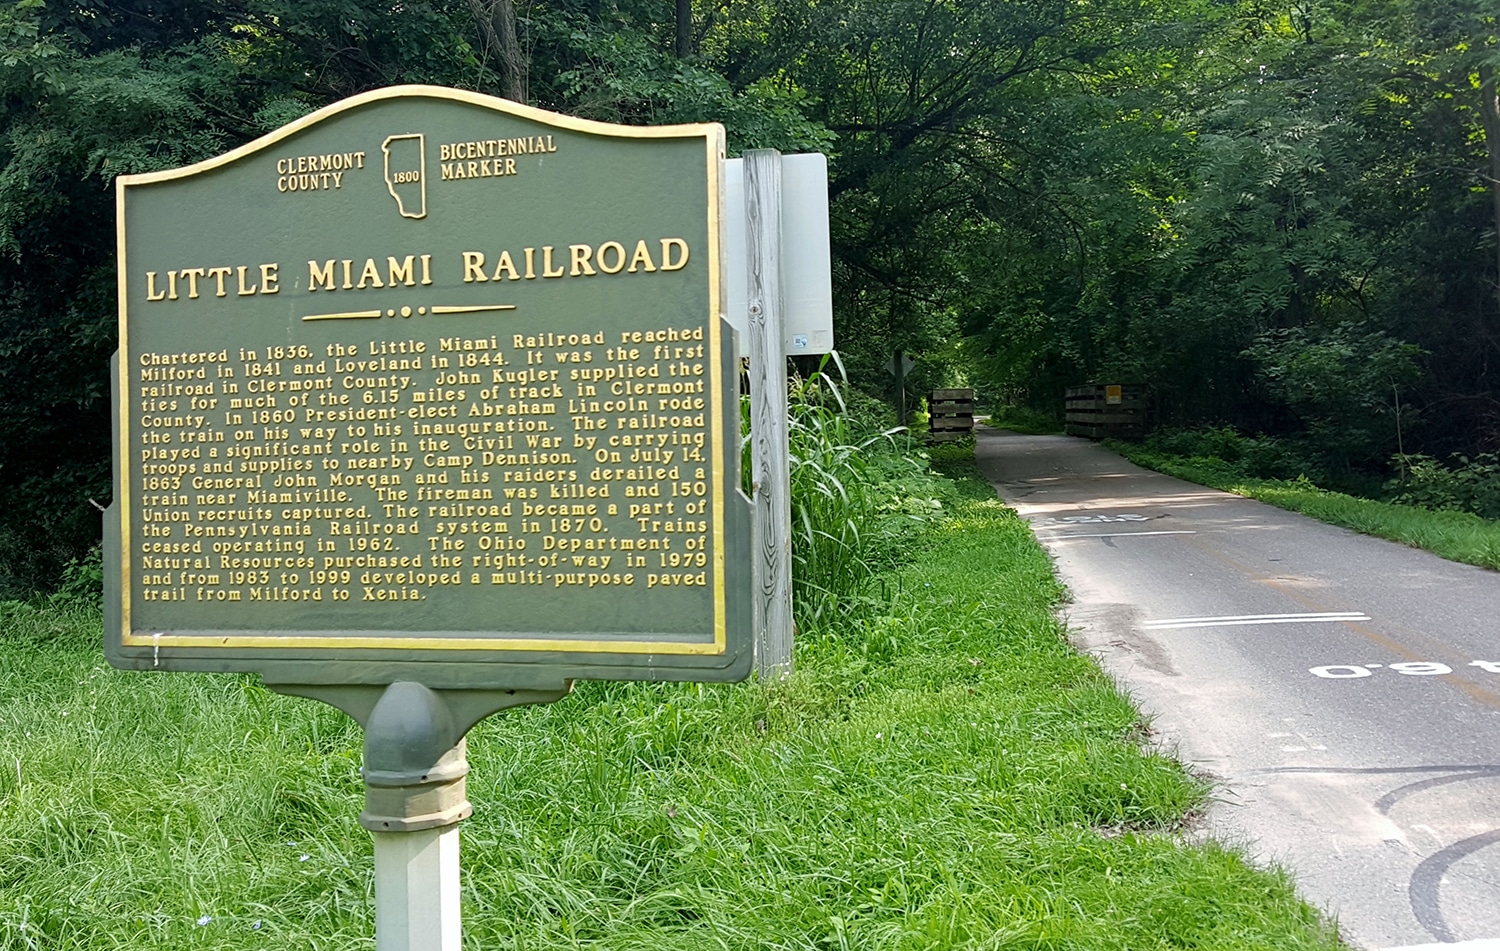 horizontal photo of part of the little miami scenic trail with a paved part of the trail, a grass verge and a bicentennial marker sign for the little miami railroad